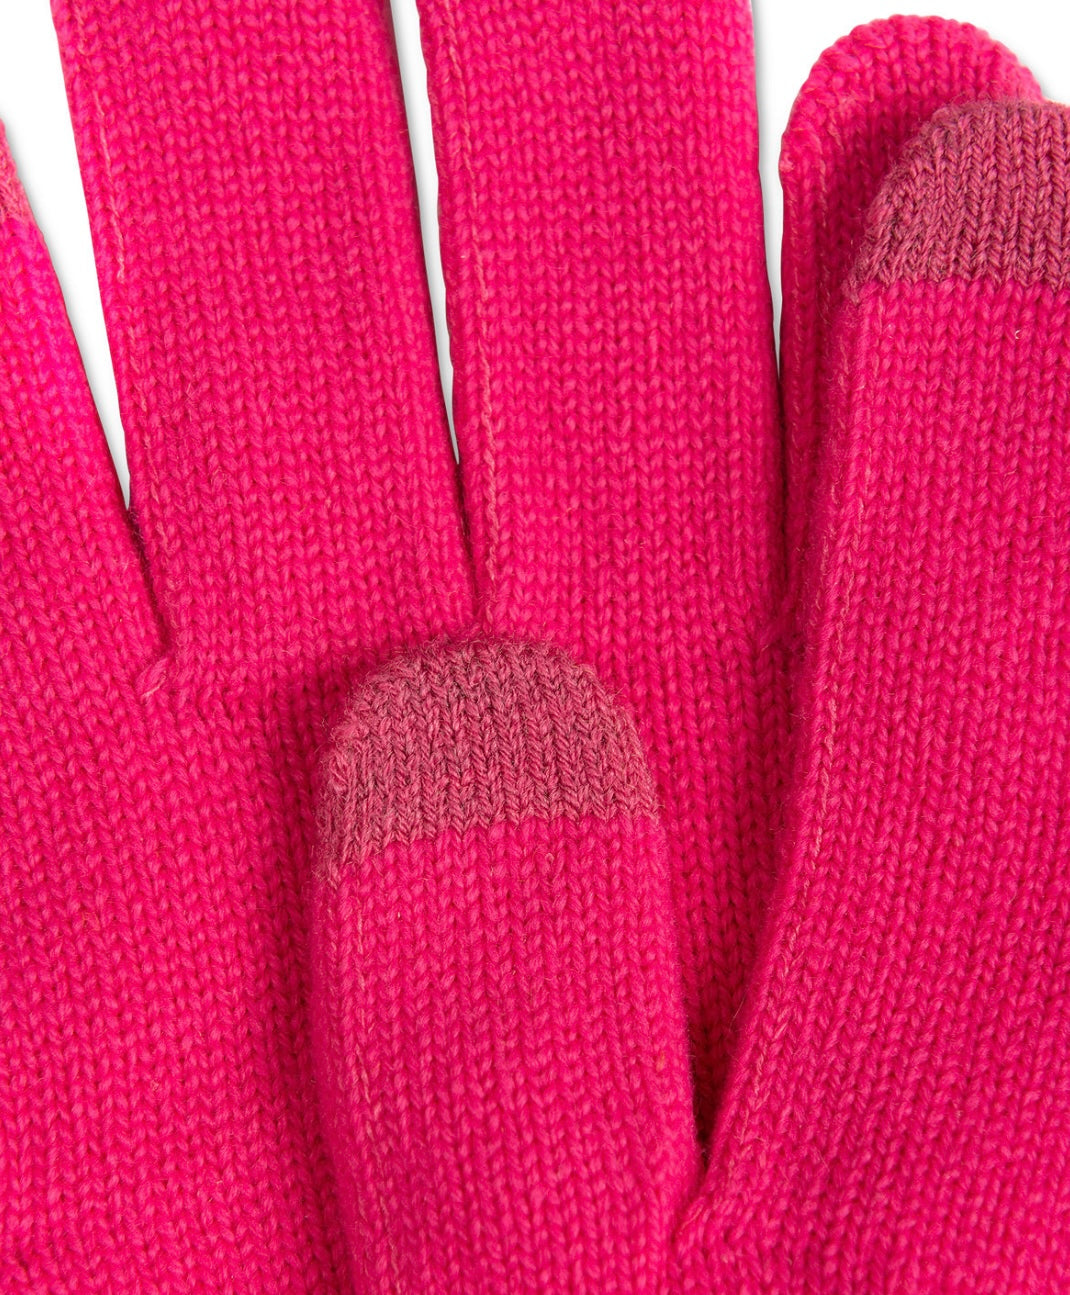 Style & Co. Women's Solid Touchscreen Gloves